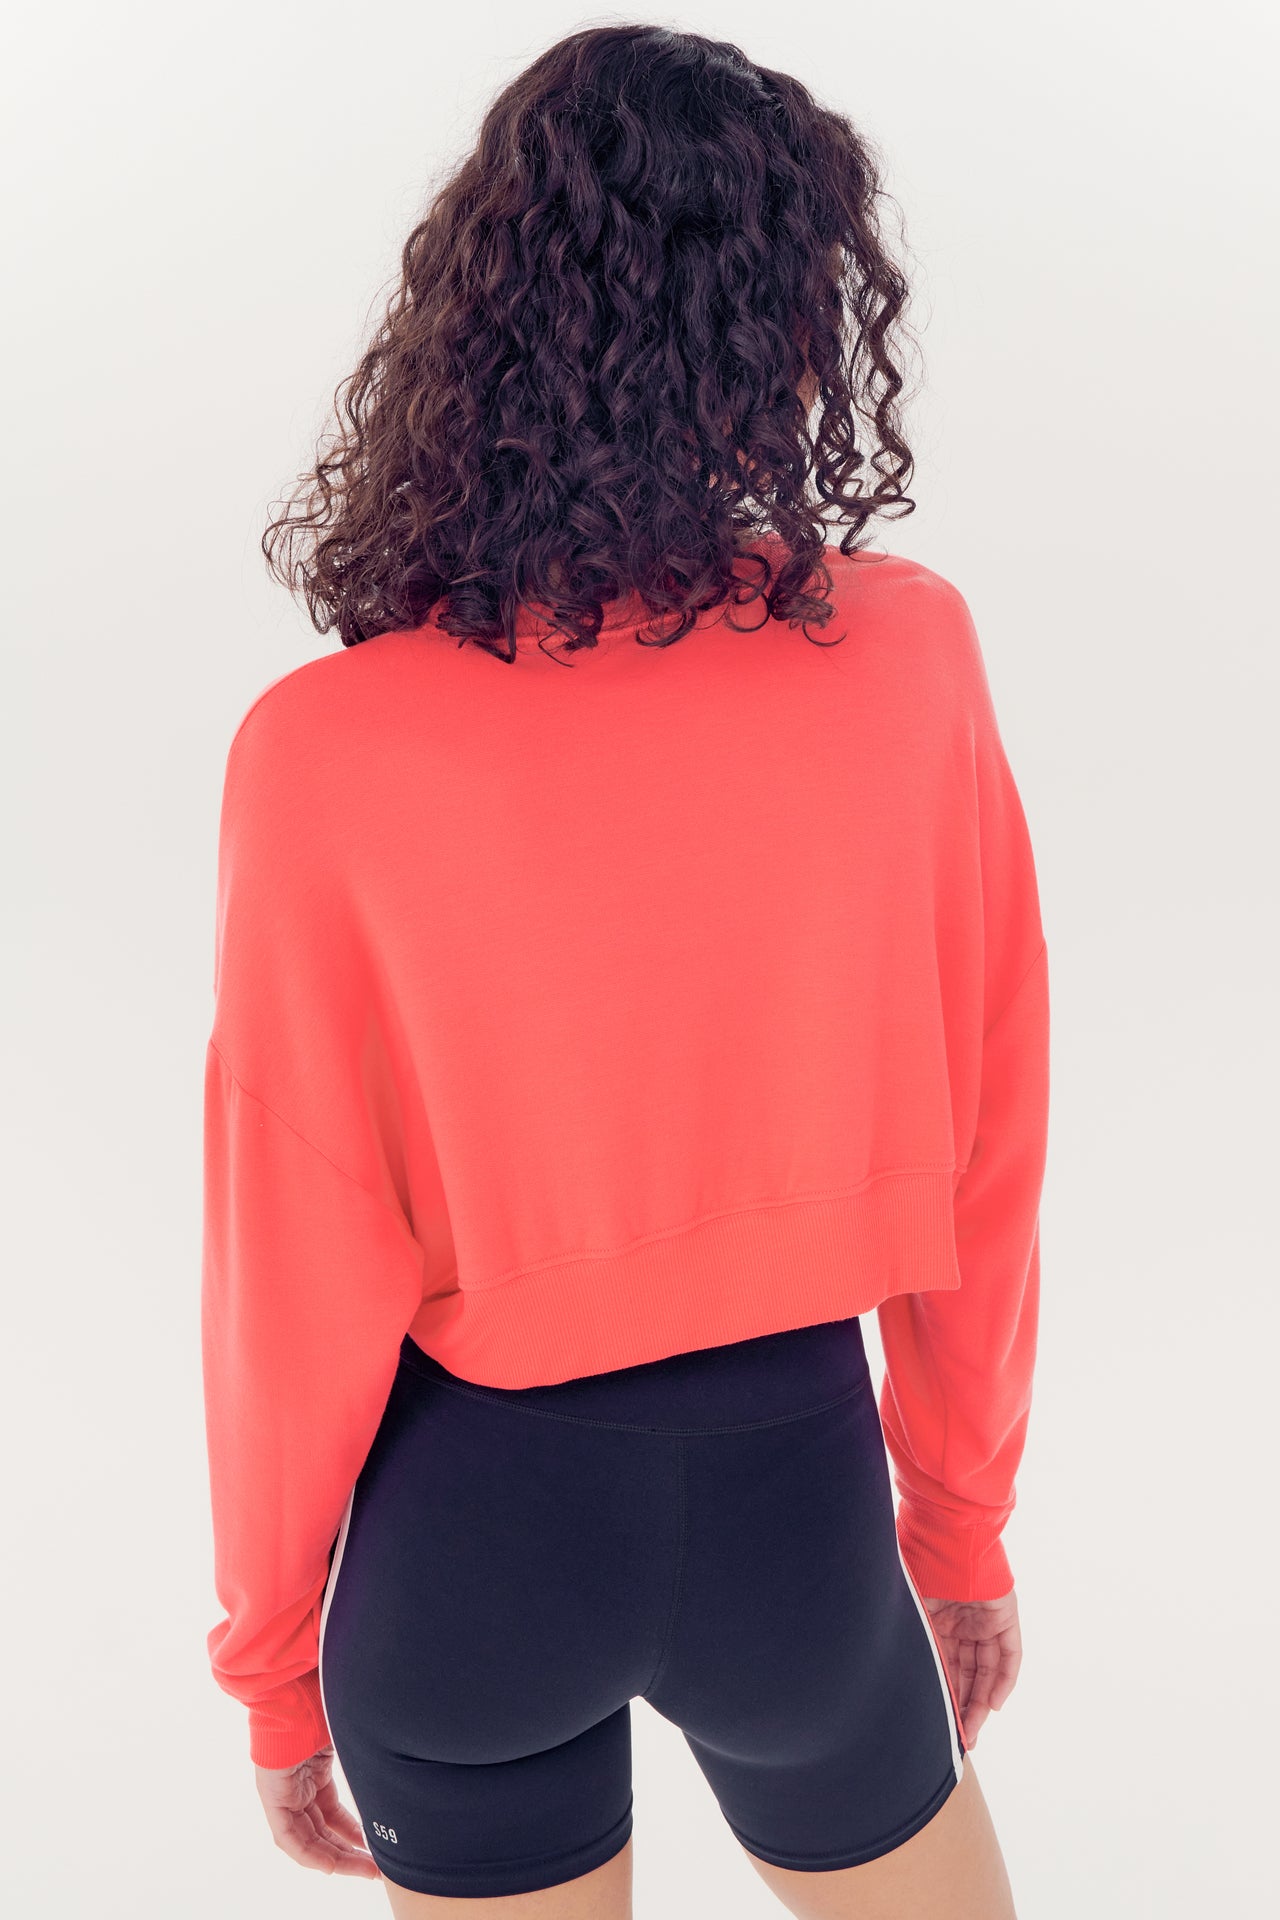 Woman standing with her back to the camera, wearing a coral red Noah Fleece Crop Sweatshirt made of modal spandex blend and black shorts by SPLITS59.